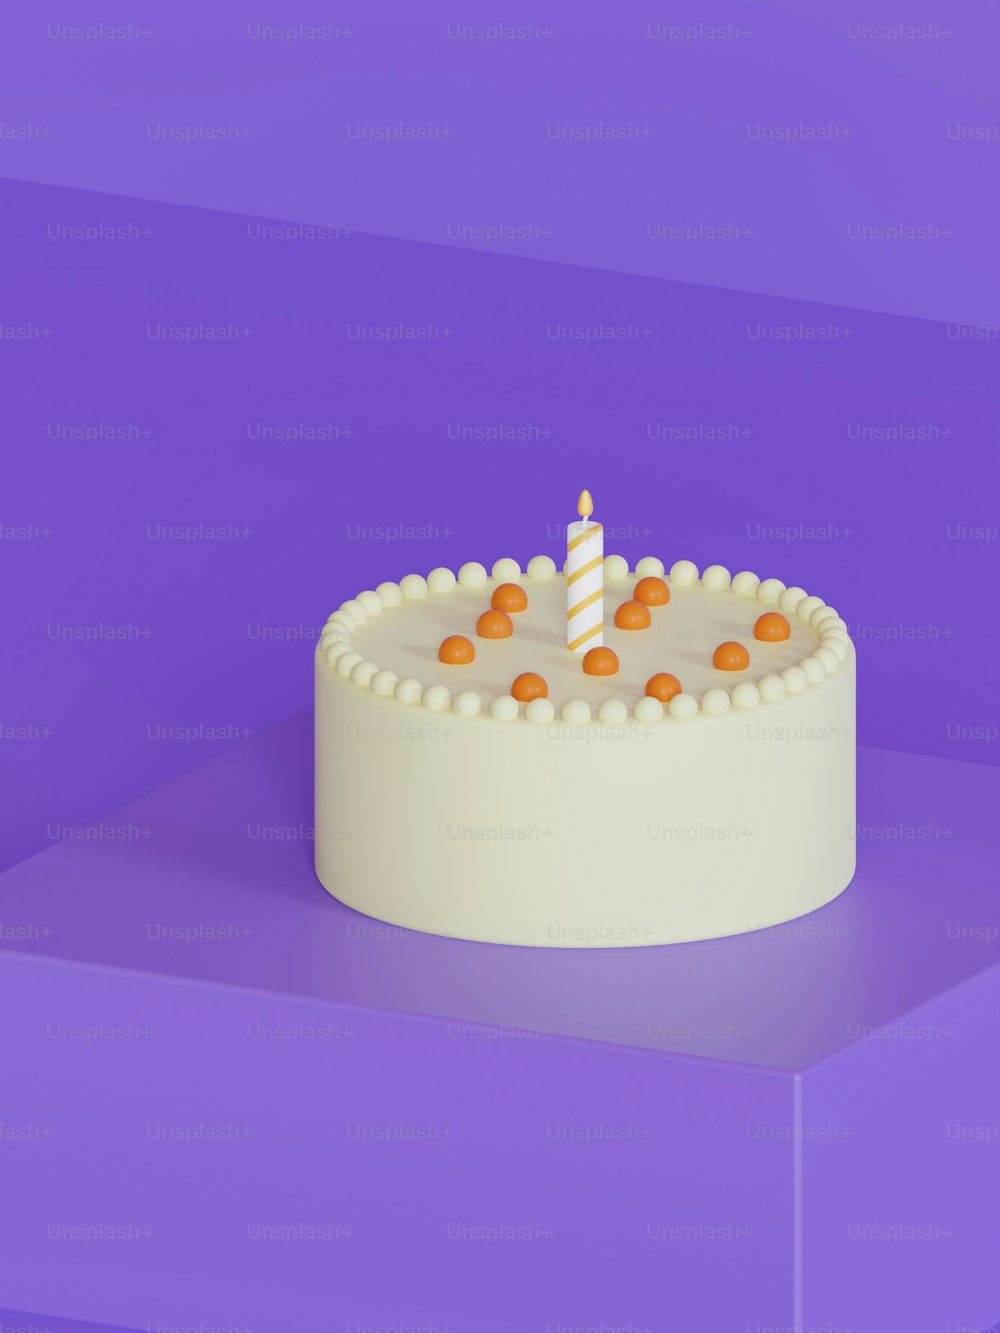 a birthday cake with a single candle on it